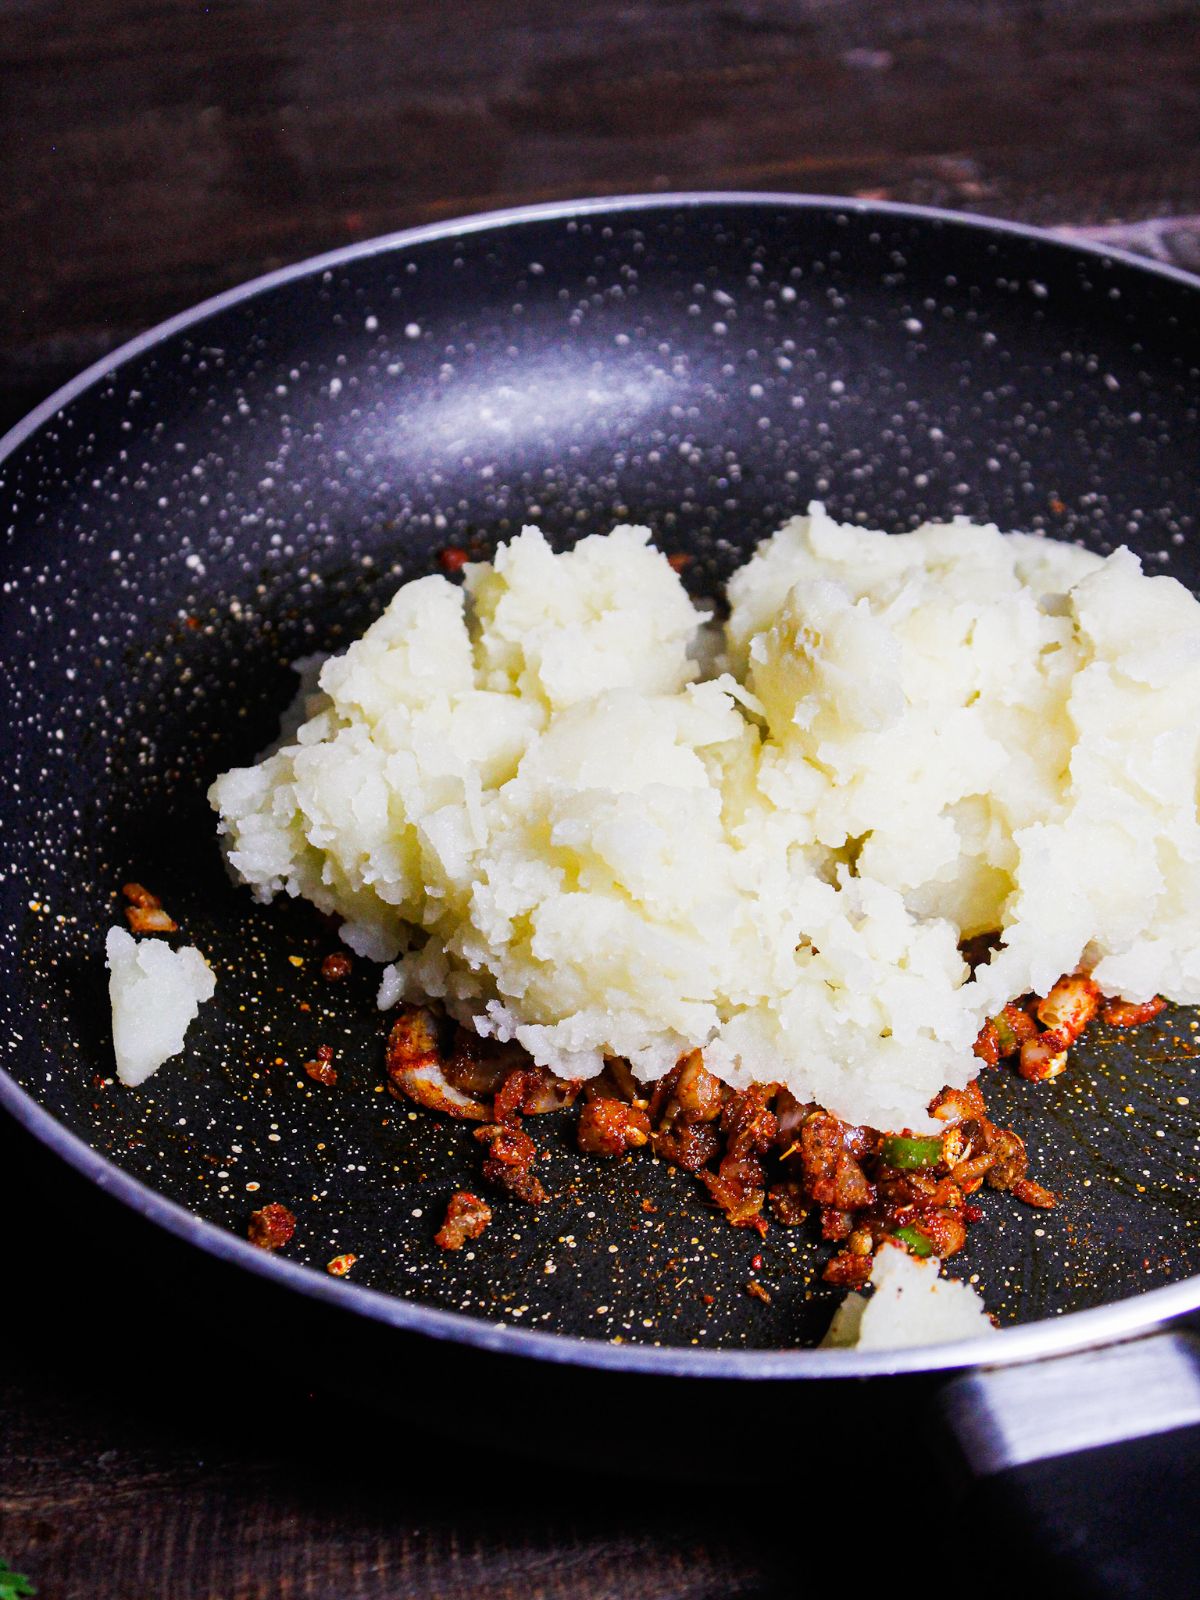 Add mashed potatoes to the pan